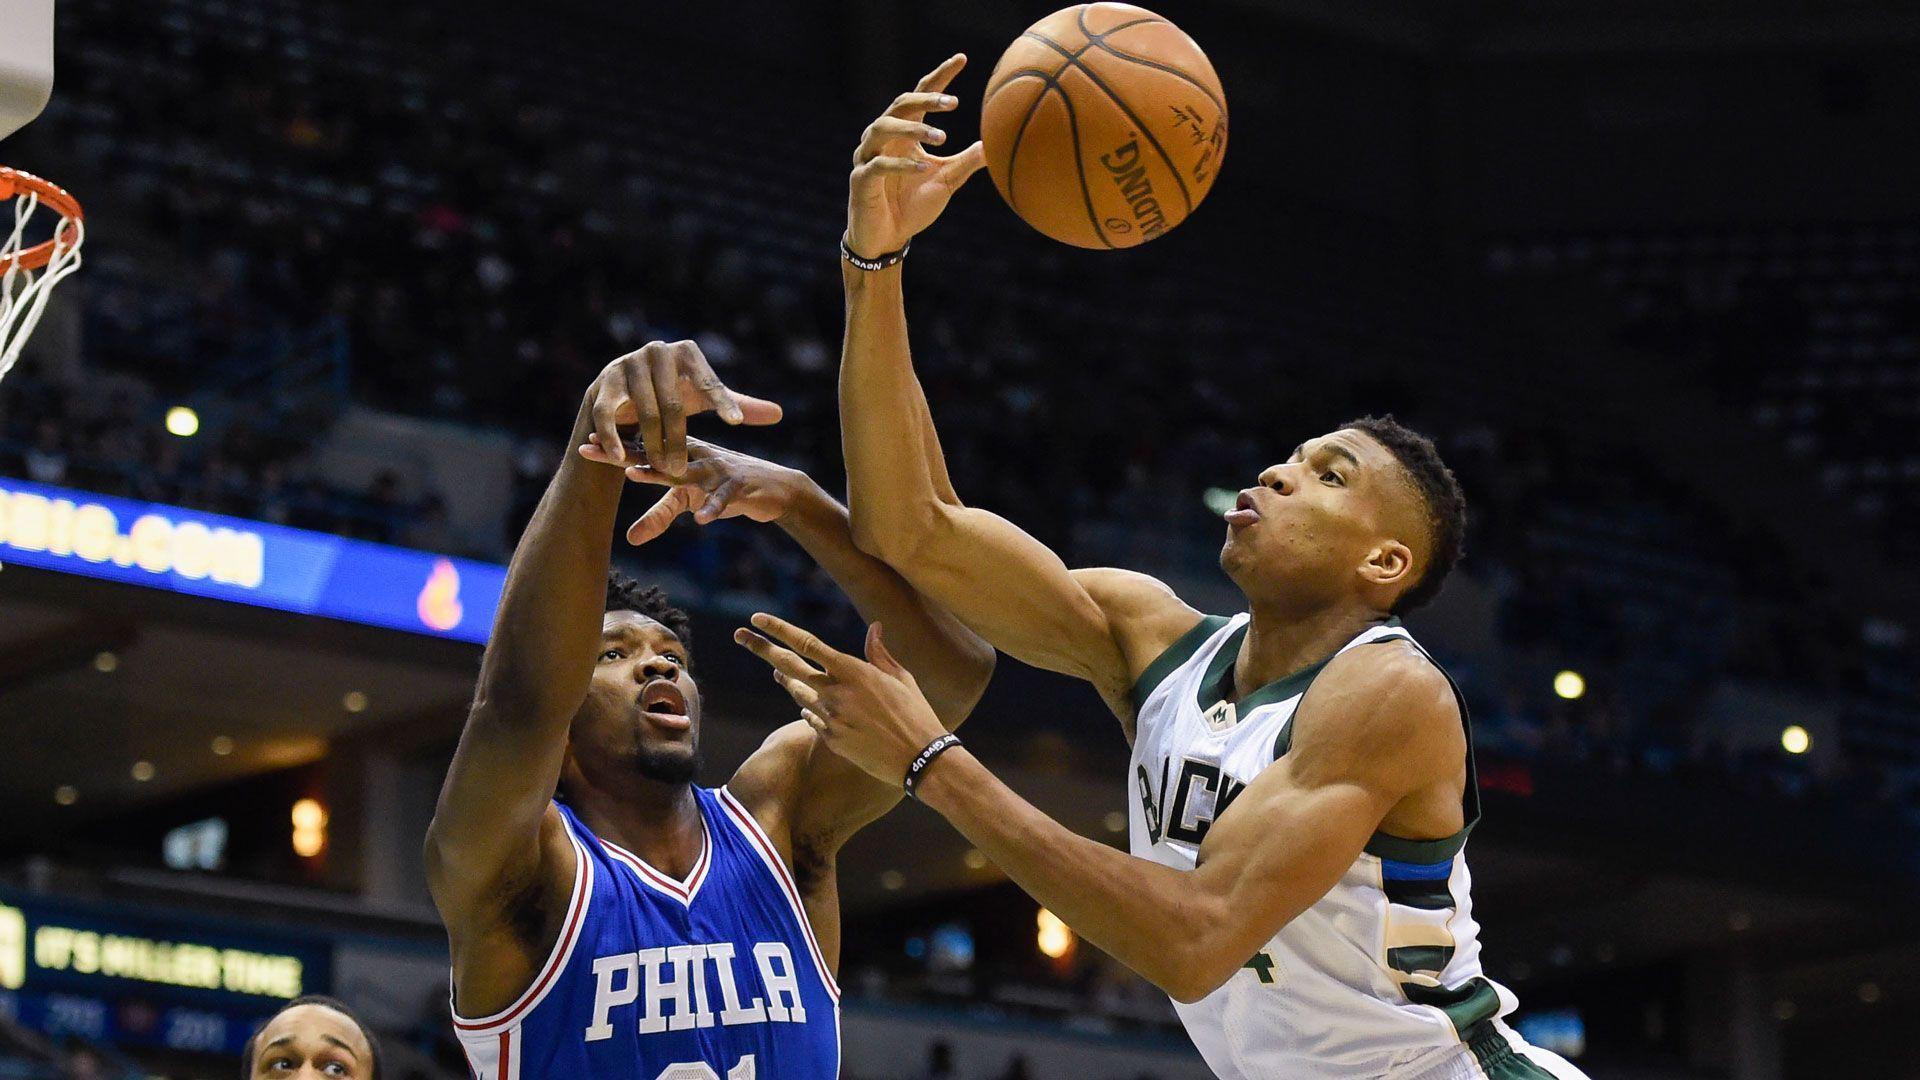 Joel Embiid tops Giannis Antetokounmpo in first meeting